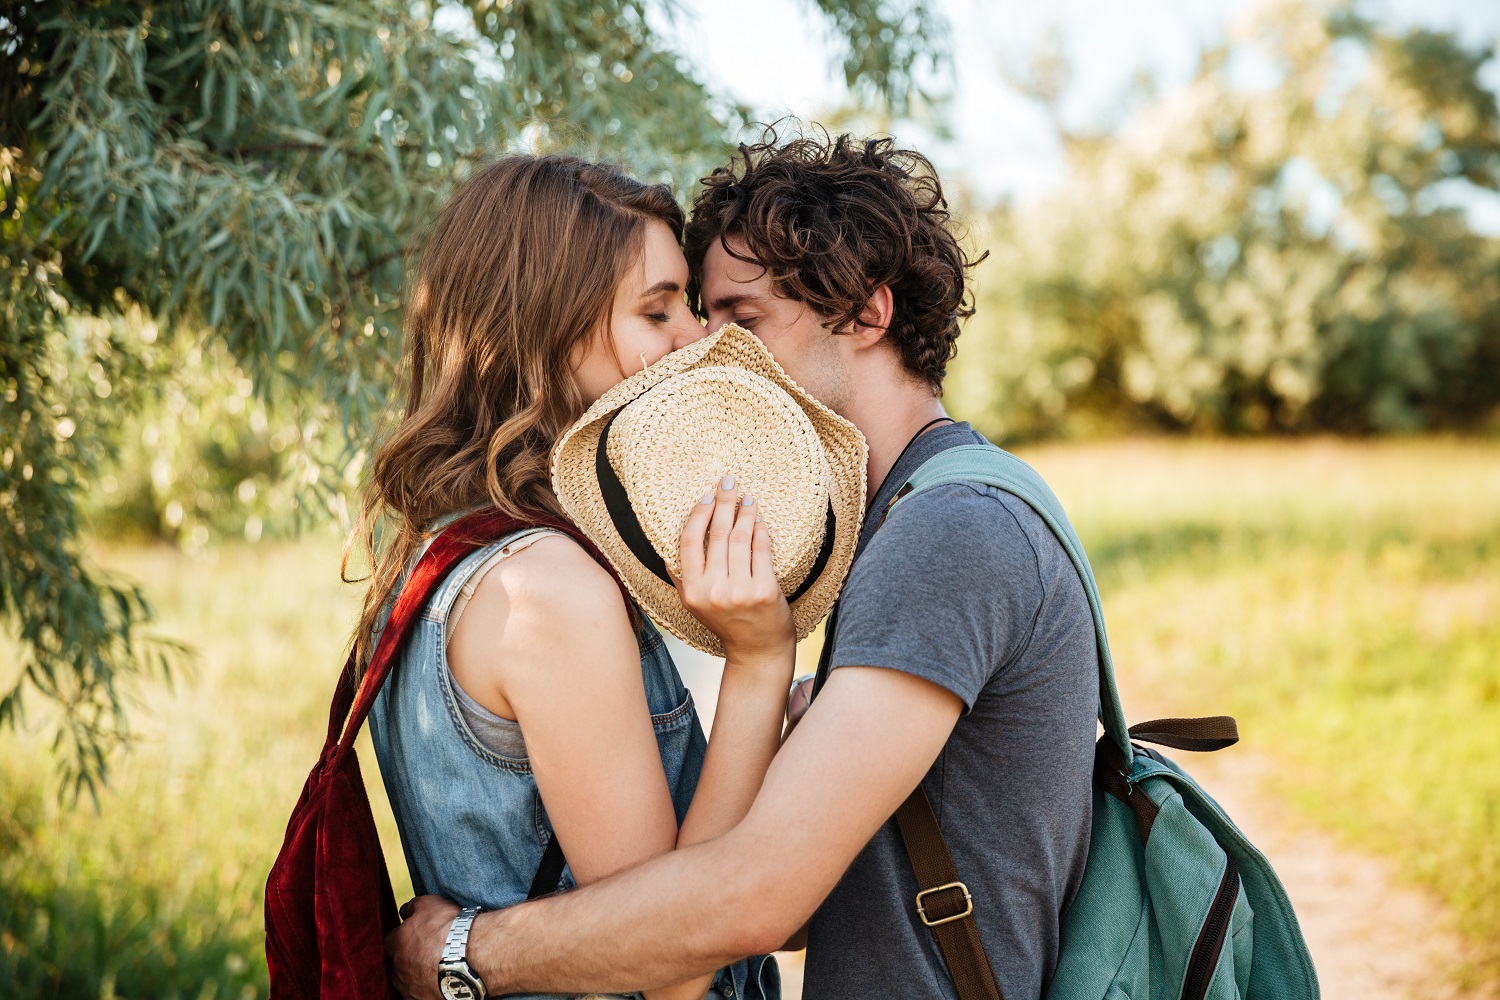 Close up portrait of a young attractive couple in love embracing with their eyes closed and kissing over forest background